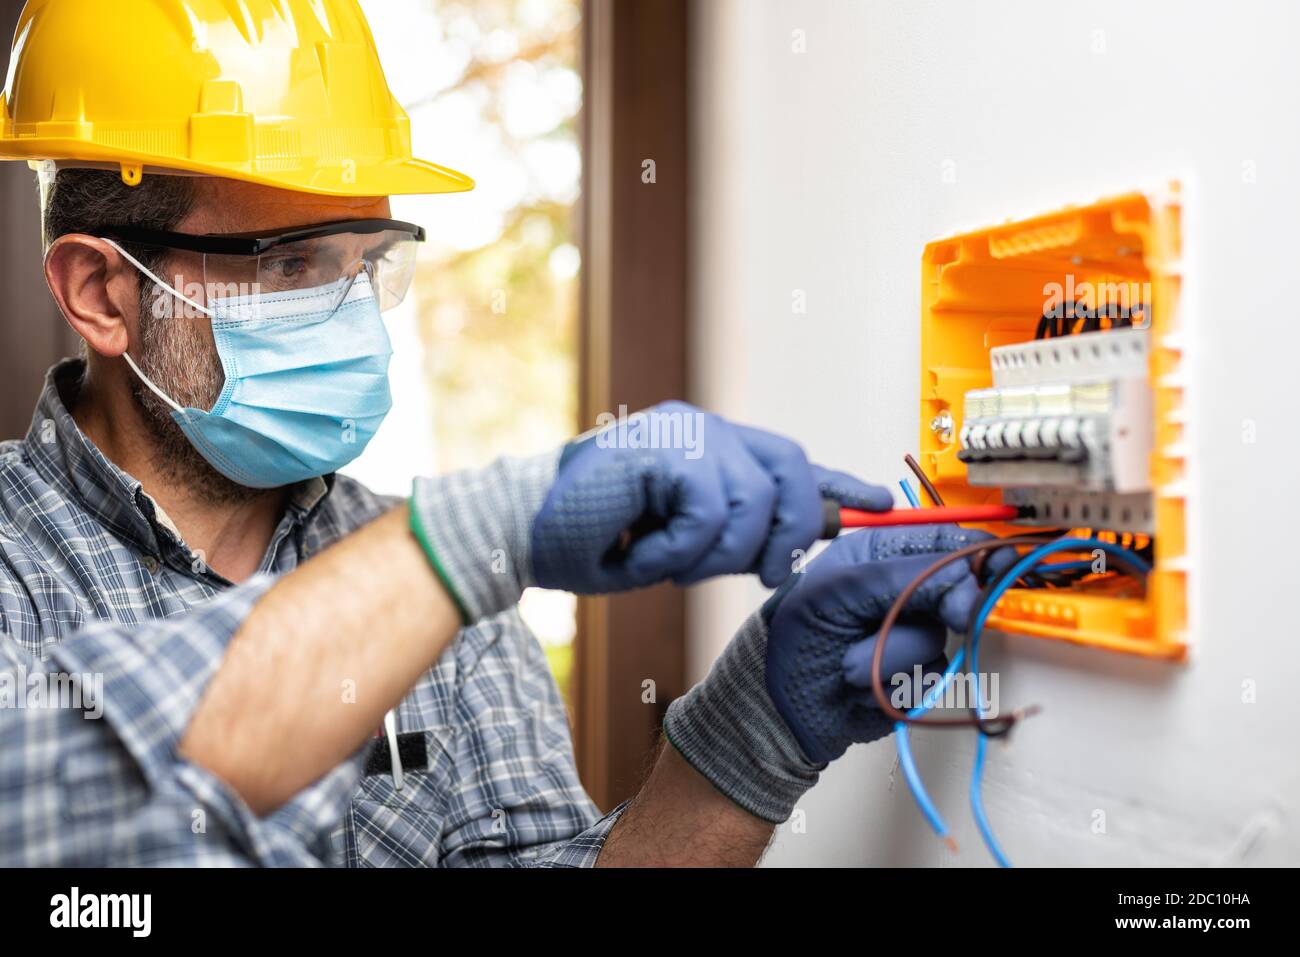 Electrician at work on an electrical panel protected by helmet, safety goggles and gloves; wear the surgical mask to prevent the spread of Coronavirus Stock Photo